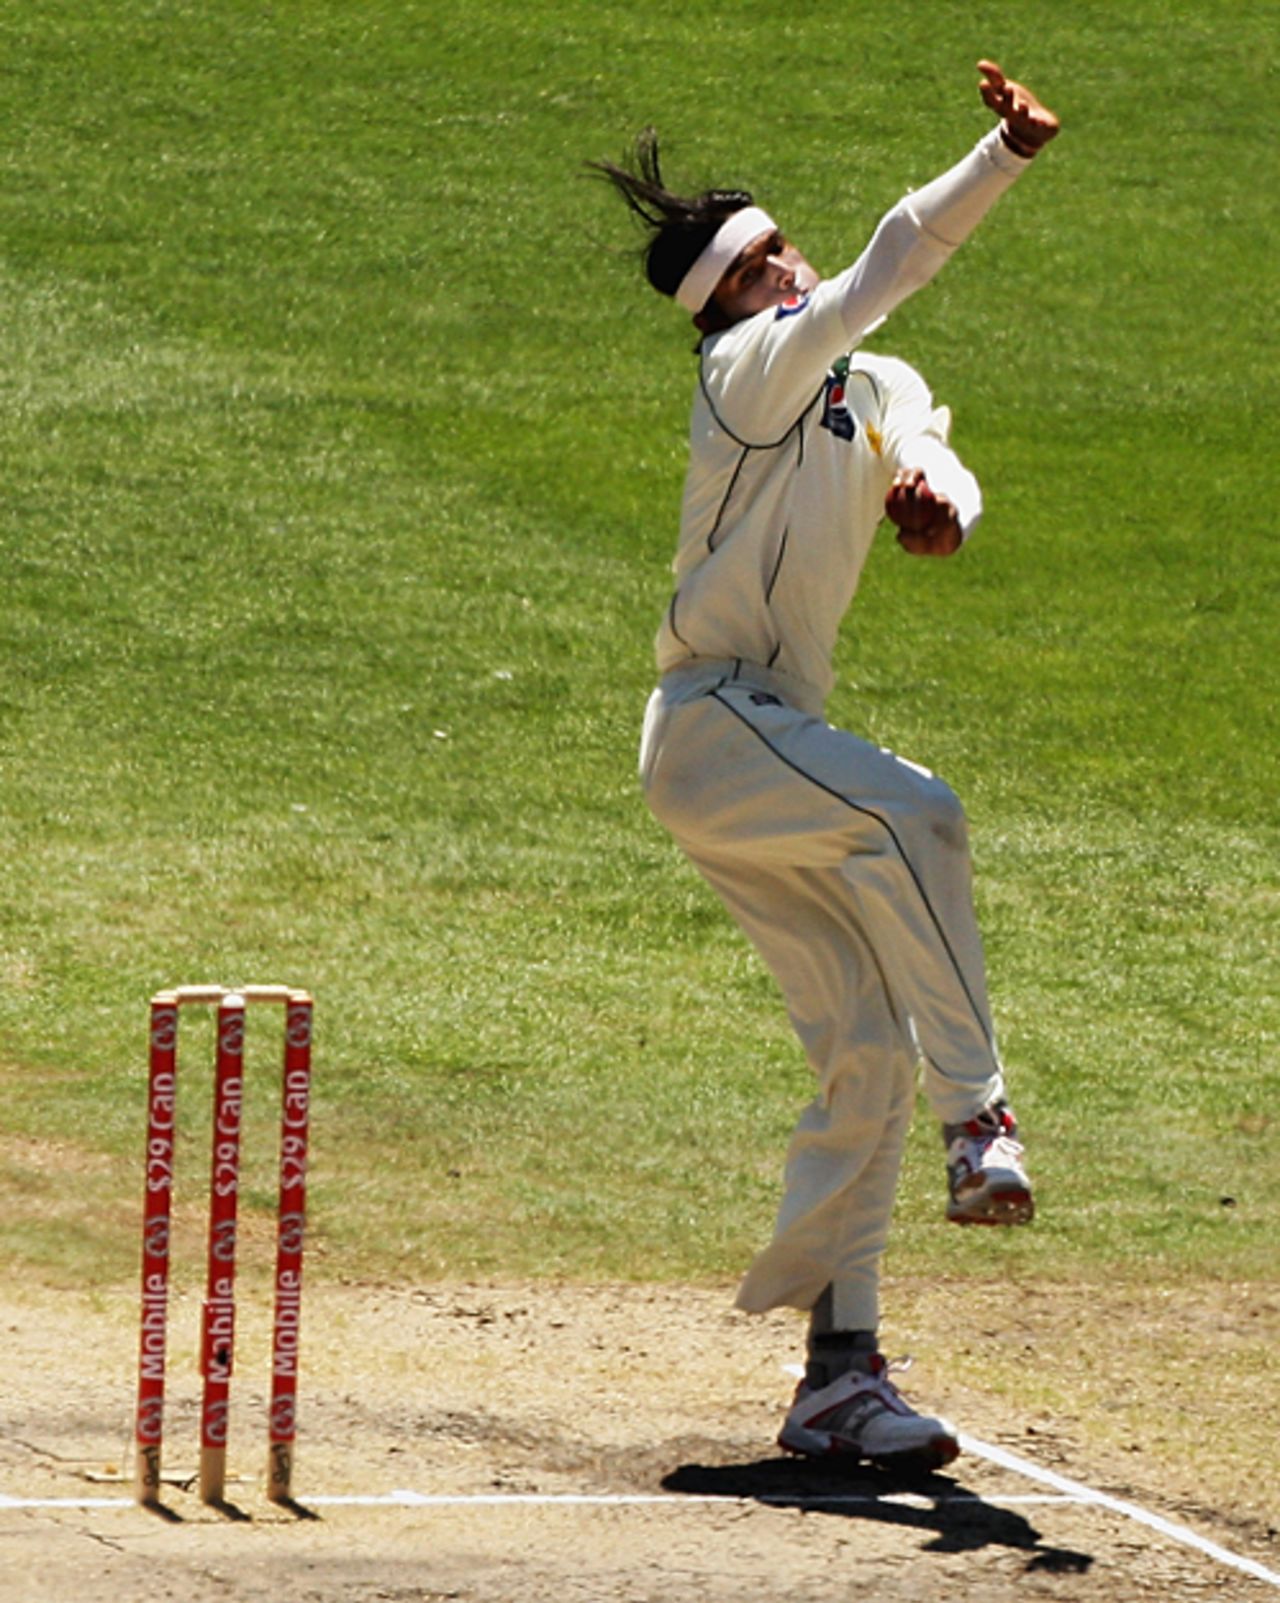 Mohammad Aamer became the youngest fast bowler to take five wickets in an innings, Australia v Pakistan, 1st Test, Melbourne, 4th day, December 29, 2009